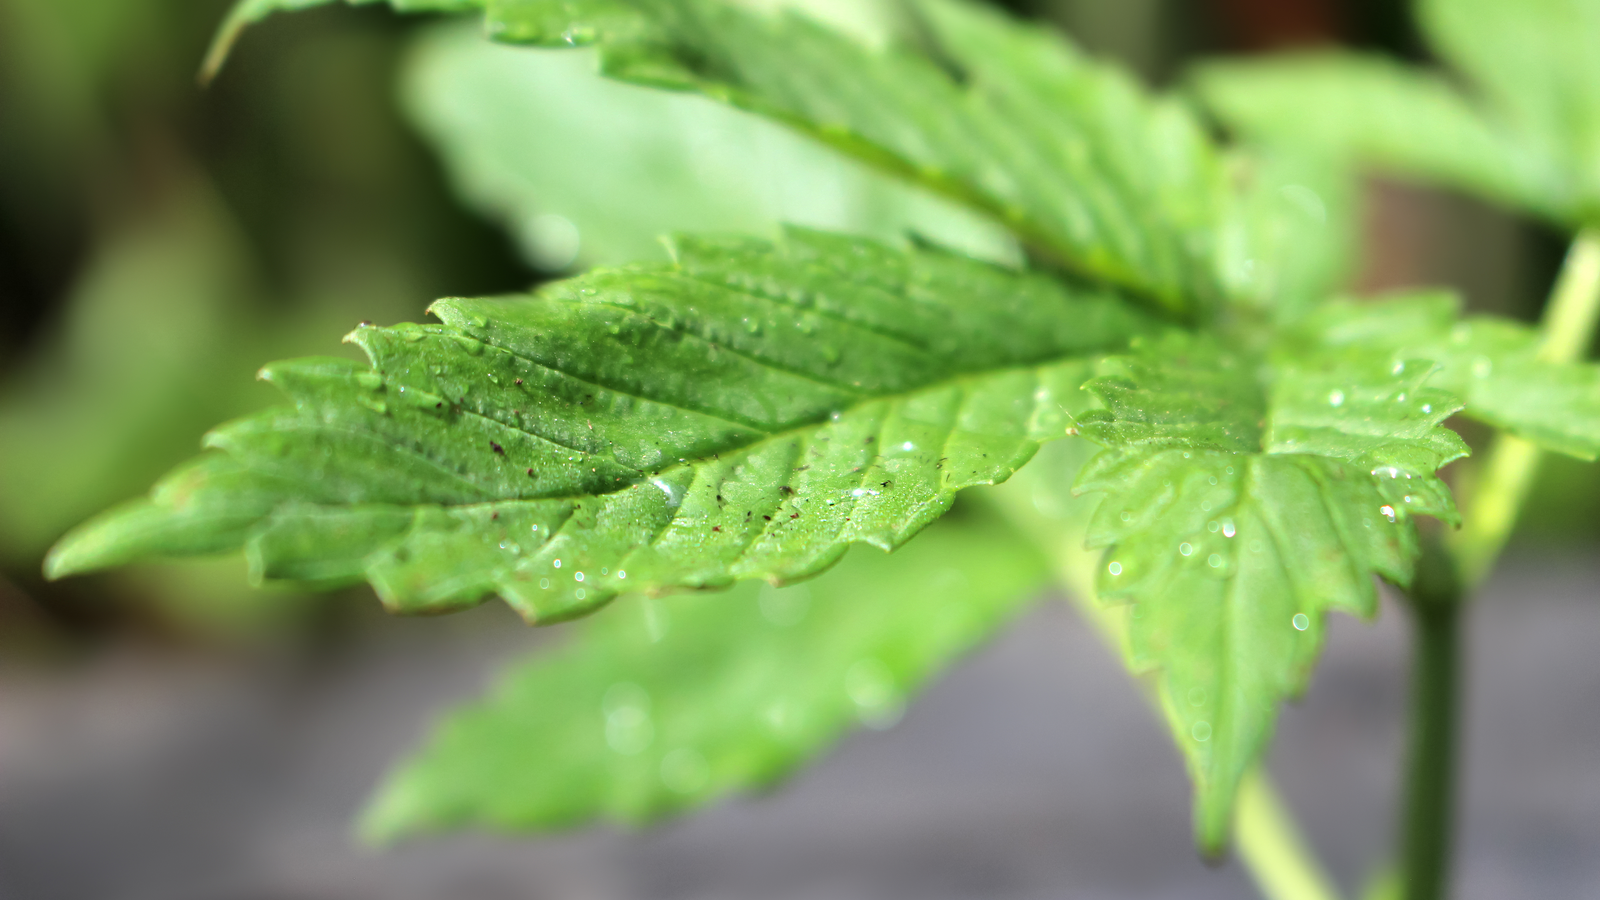 INM Stock. Young green medicinal marijuana plant in a pot after a rain fall shallow depth of field with focus on leaf; cannabis stocks